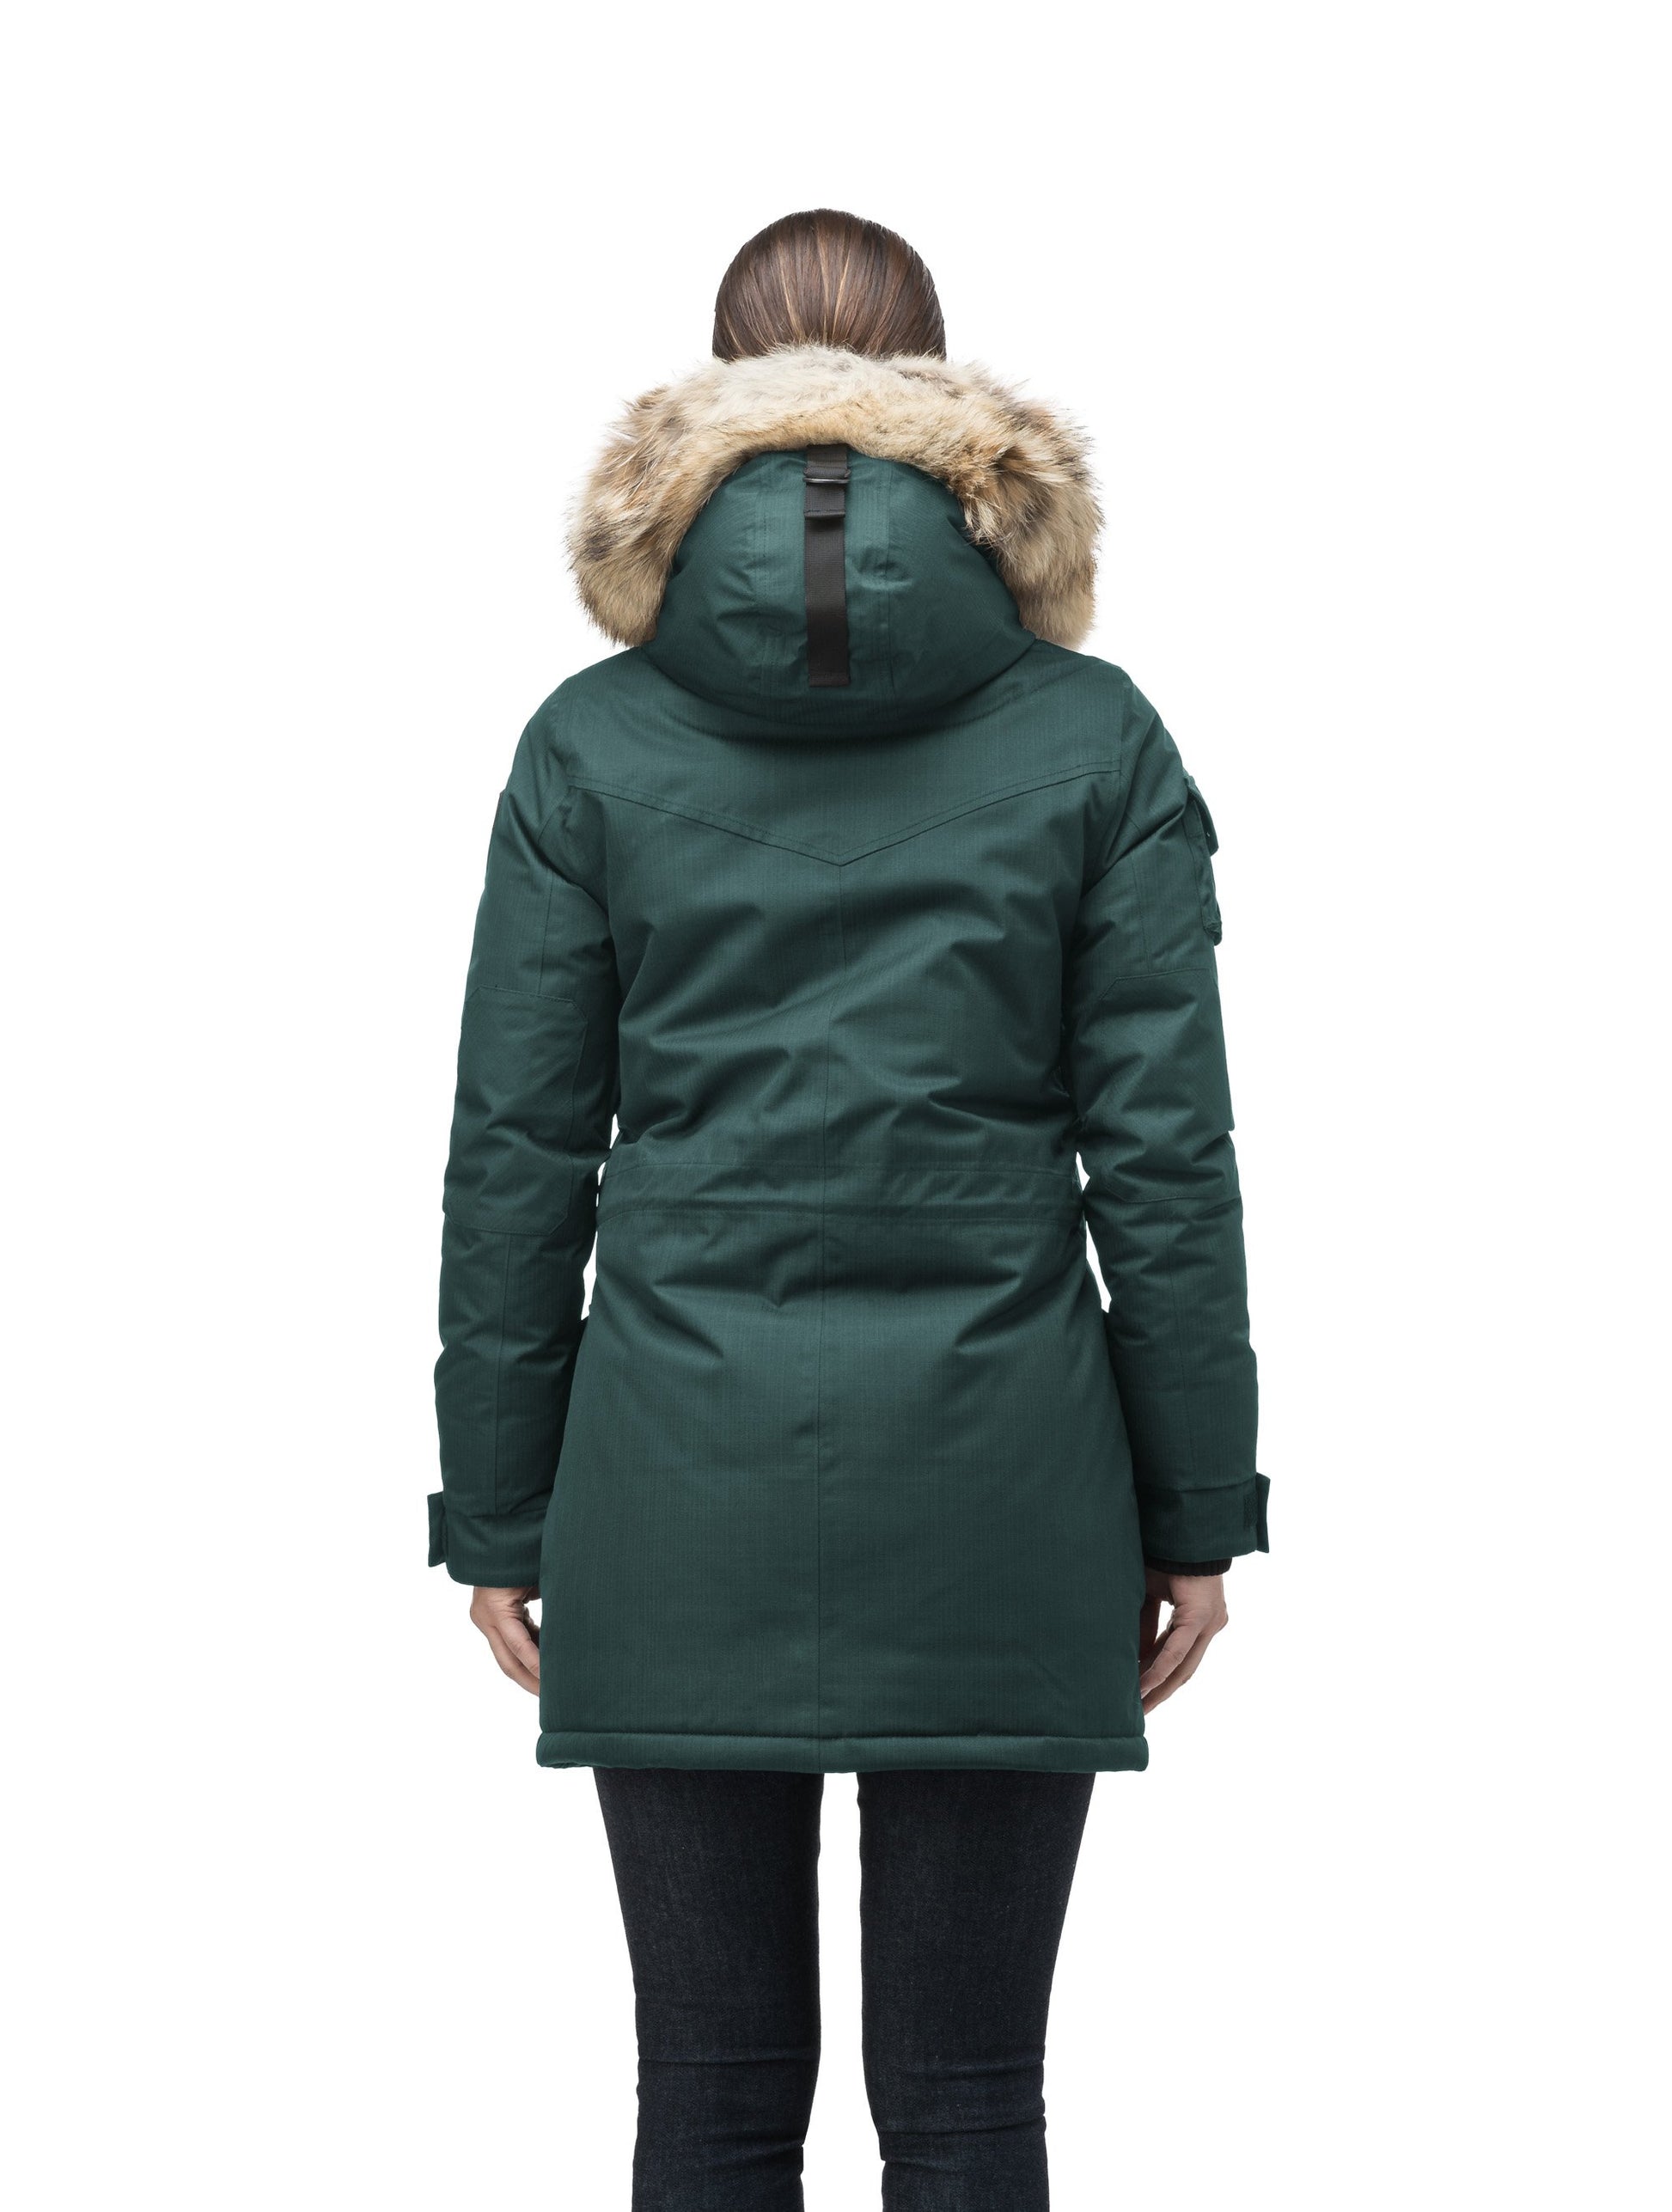 Women's down filled thigh length parka with four pleated patch pockets and an adjustable waist in CH Forest